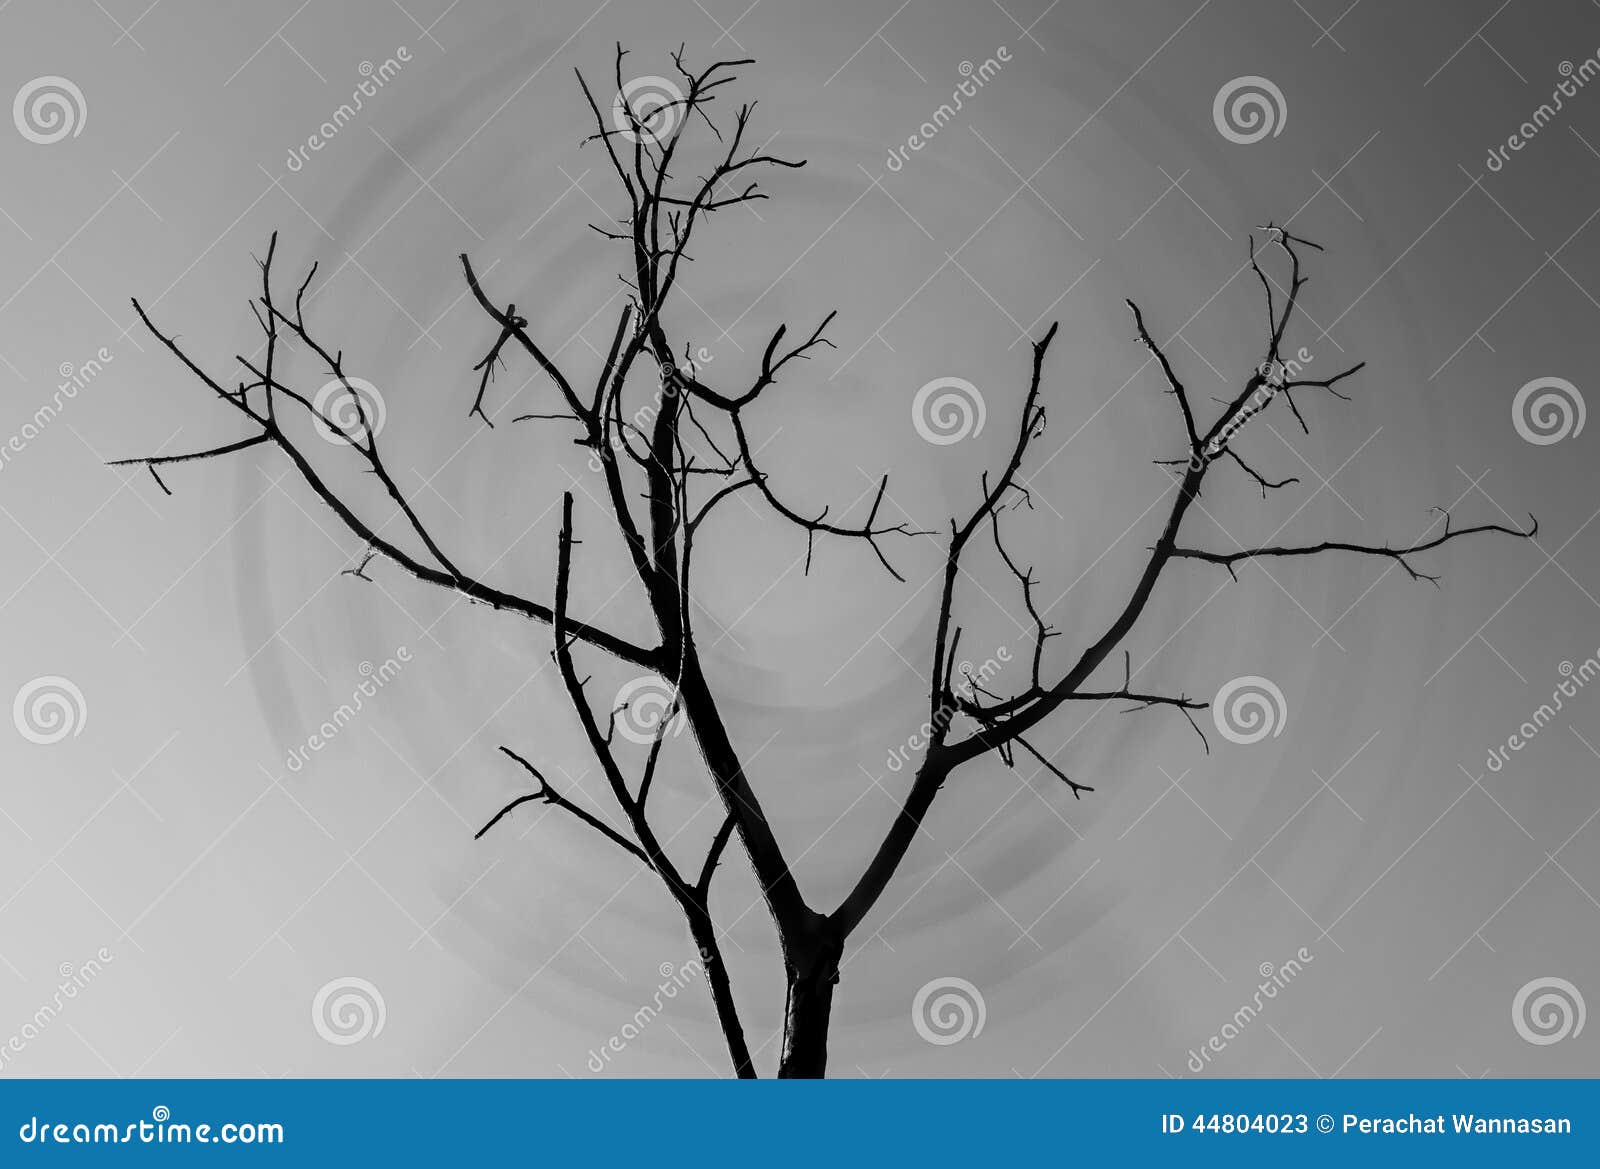 a silhouette of alone a tree 